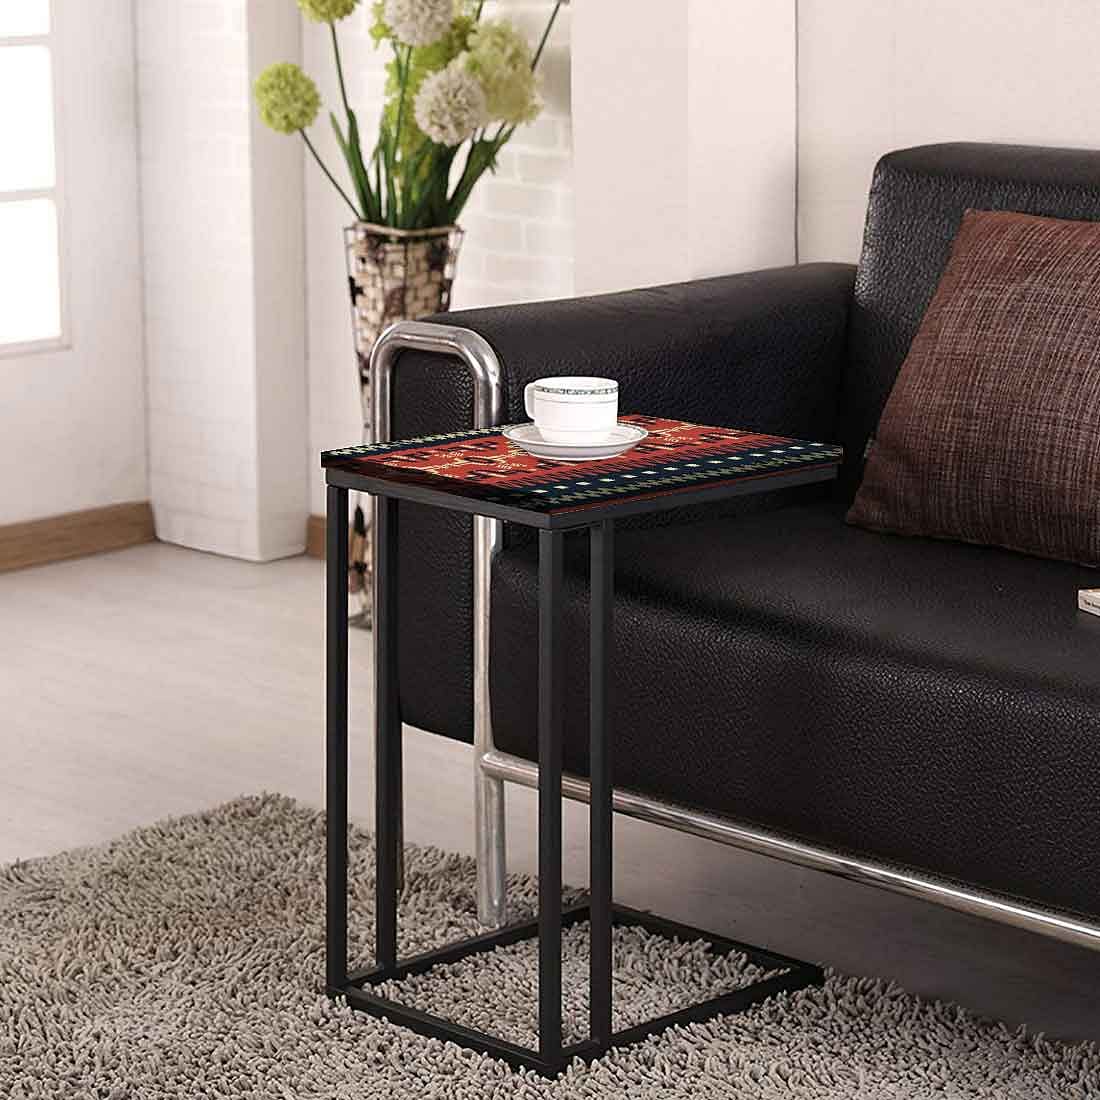 C SideTable For Sofa - Brown Mexican Pattern Nutcase